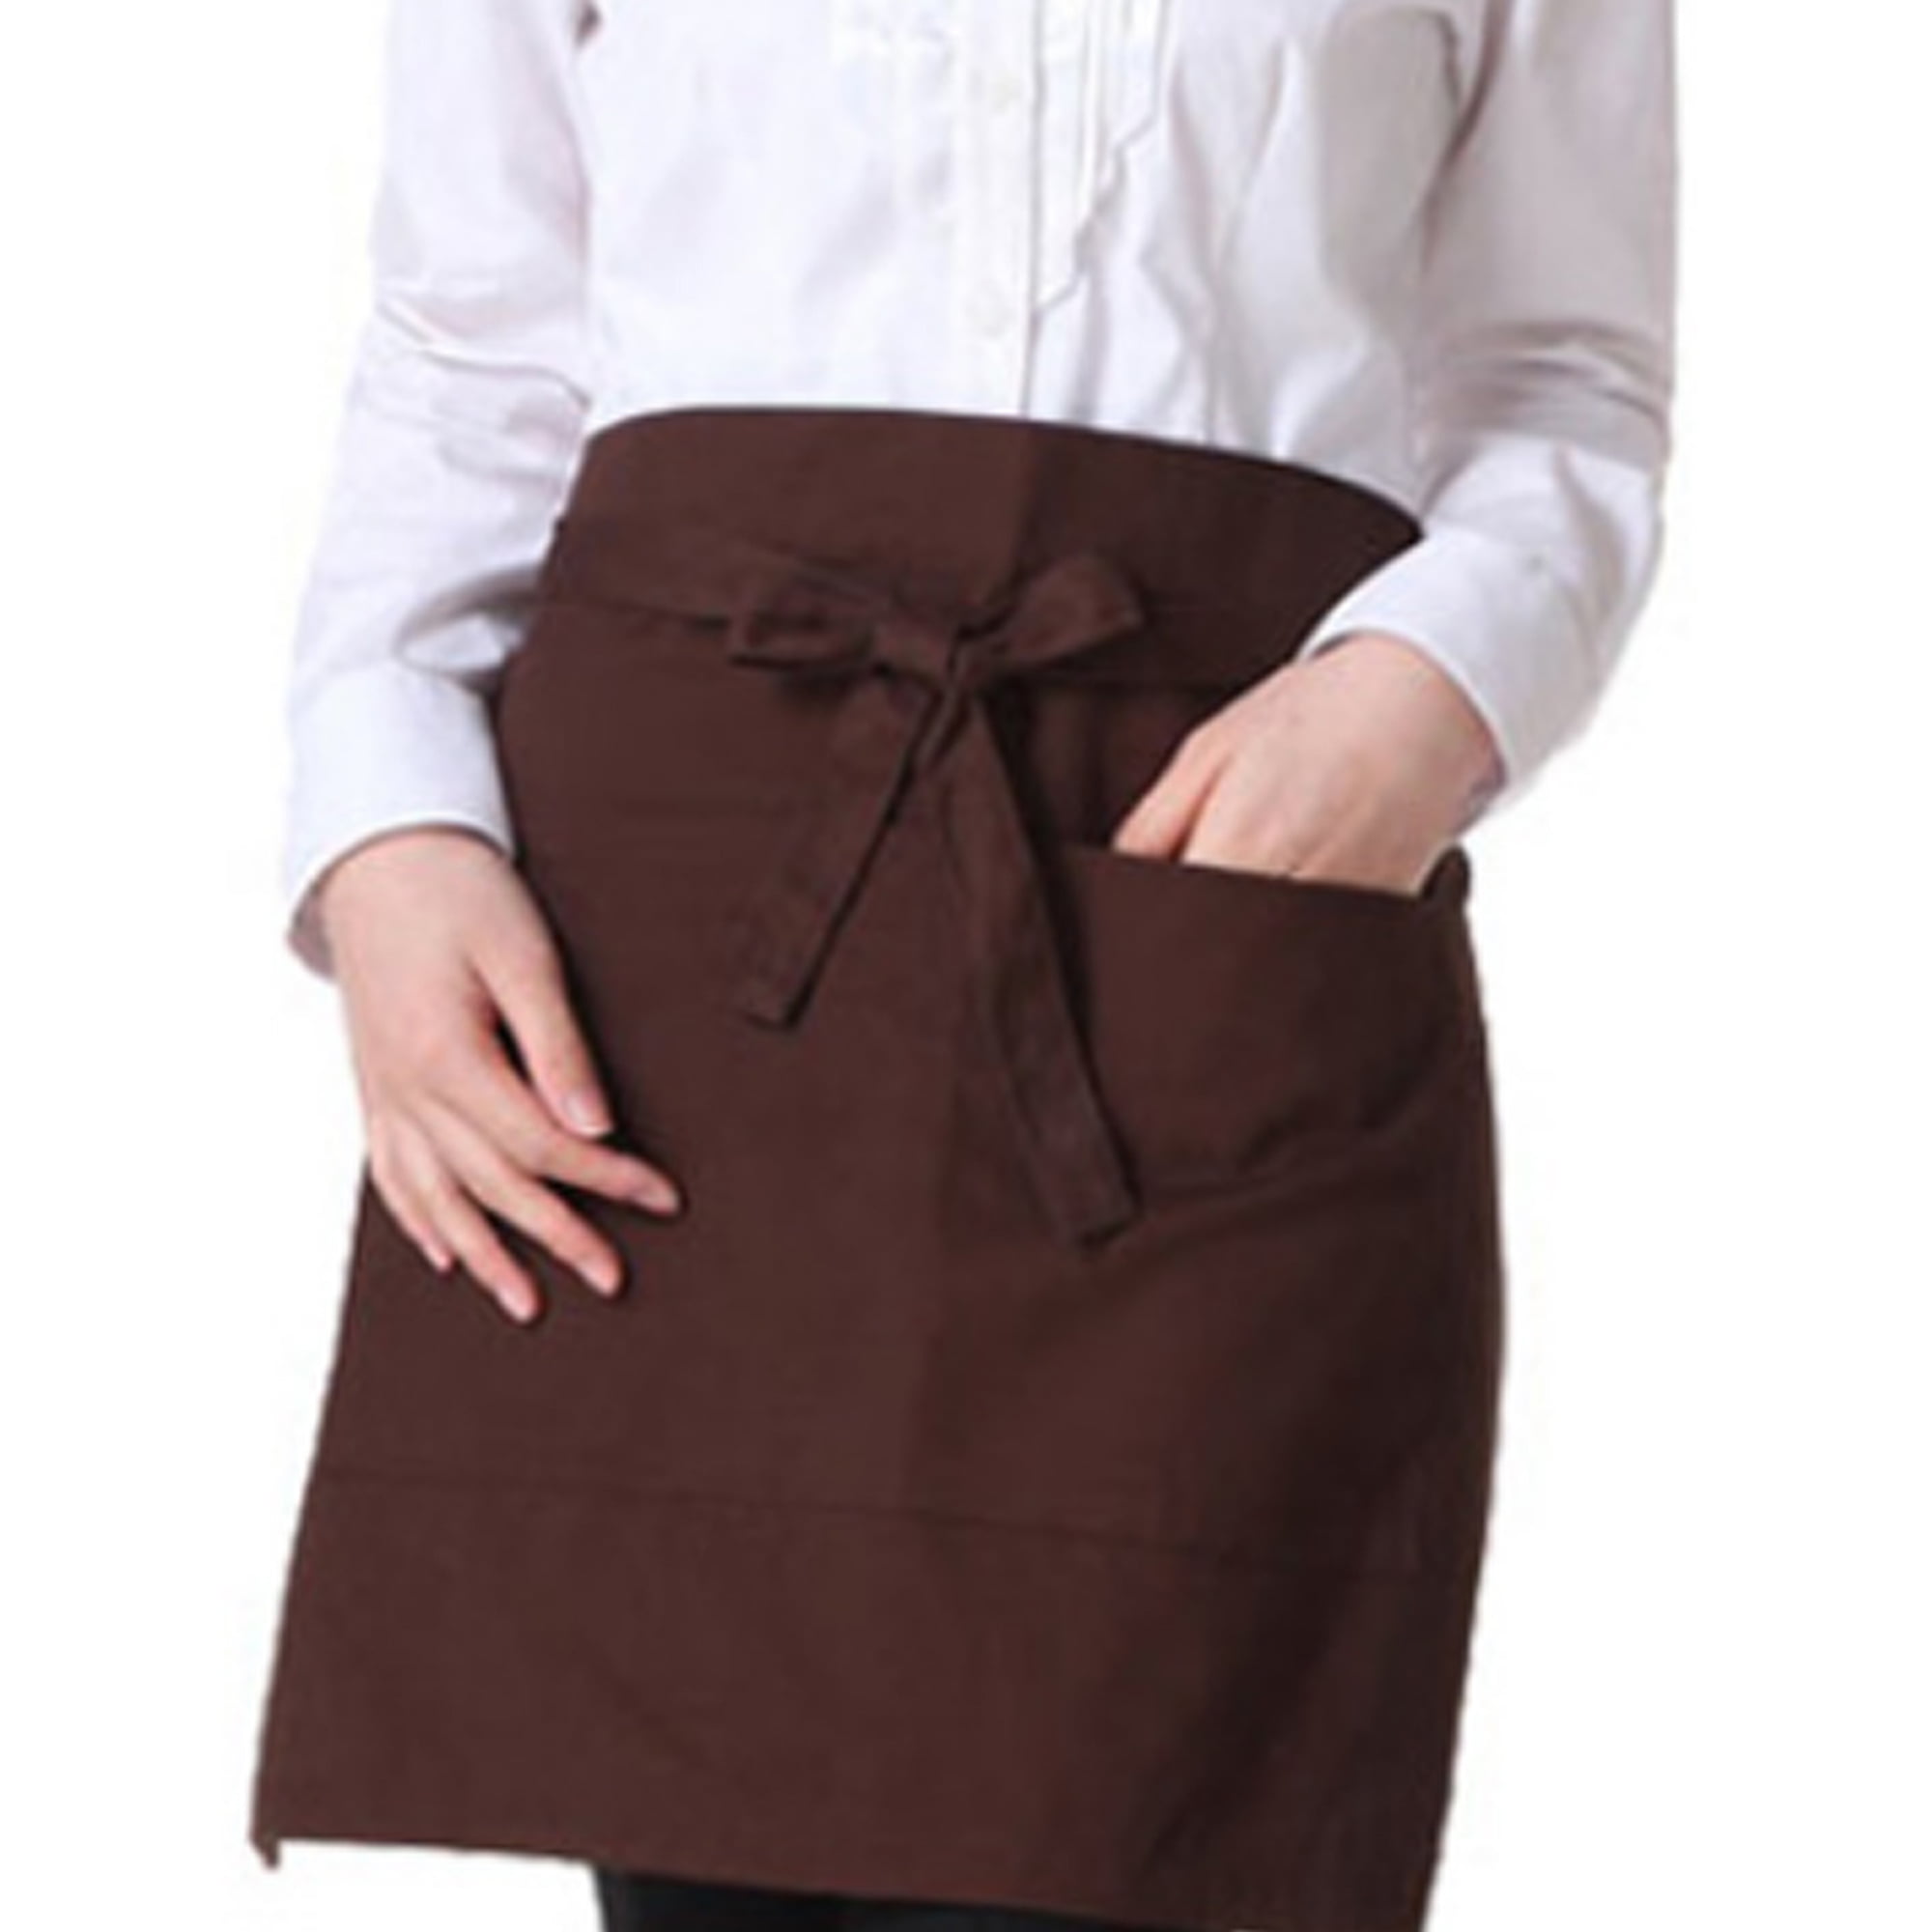 10 x Half Length Short Waist Apron's with Pockets for Bar Cafe Waiters FREE POST 